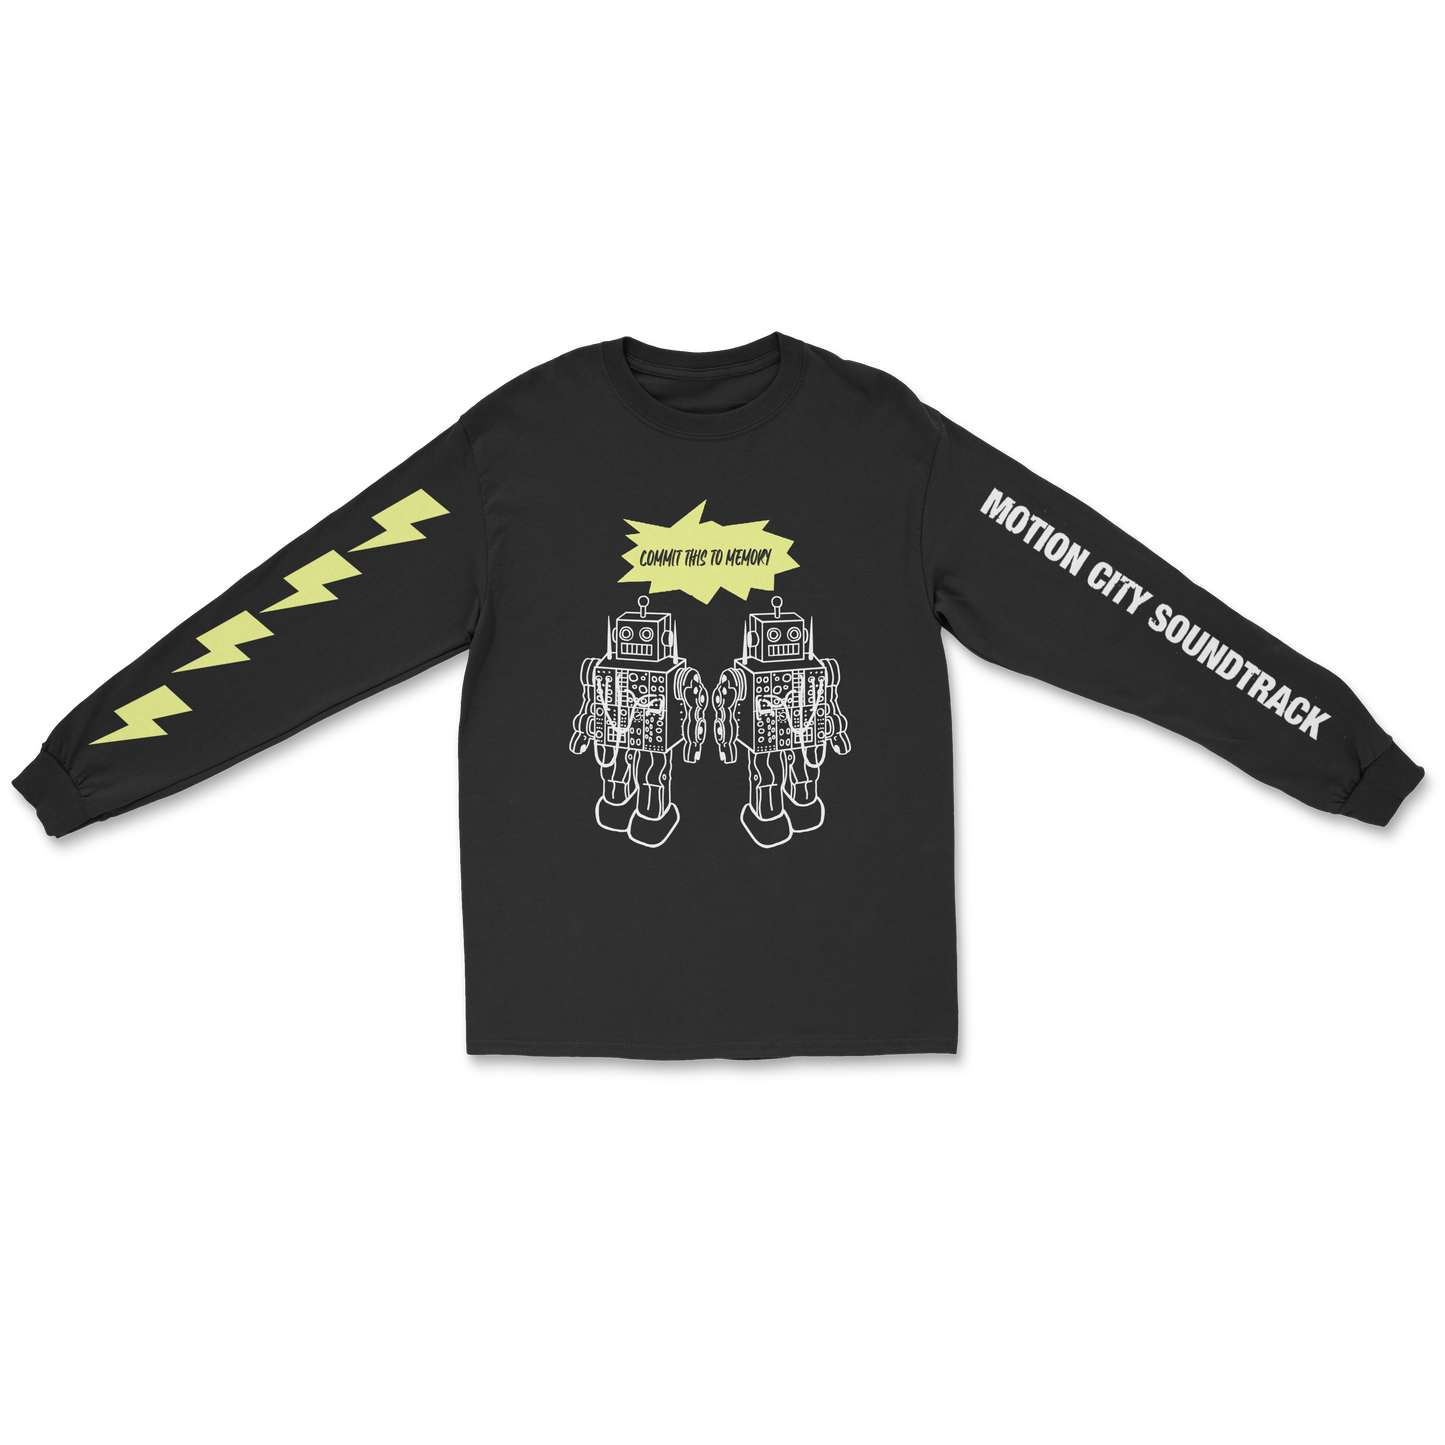 Black longsleeve tee, COMMIT THIS TO MEMORY in black lettering with a yellow background, two white robots graphic, MOTION CITY SOUNDTRACK in bold white lettering down the left sleeve, four yellow lightning bolts down the right sleeve. 